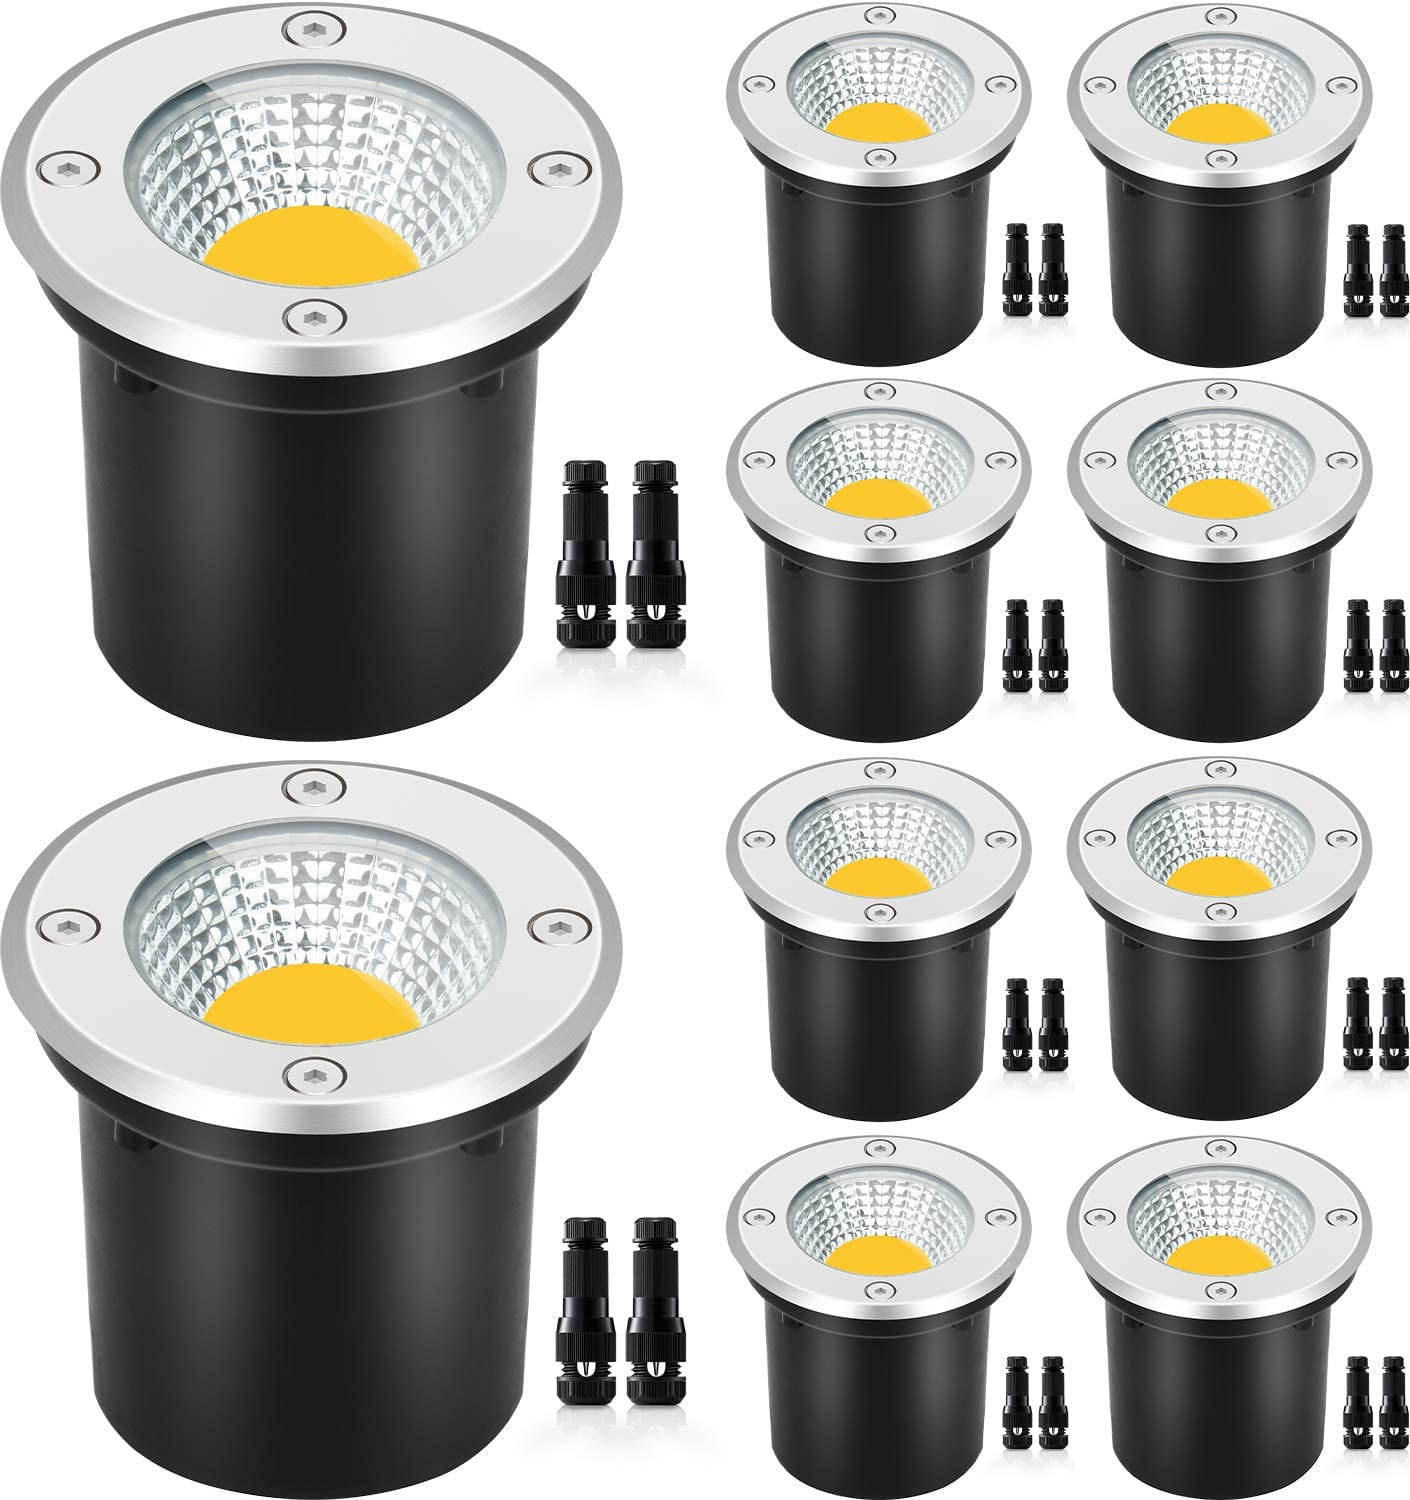 Voltage Landscape Lights with Wire Connectors 12W LED Well Lights IP67 Waterproof Outdoor In-Ground 12V-24V White Pathway Garden Lights for Driveway (10 Pack & Connectors) - Walmart.com